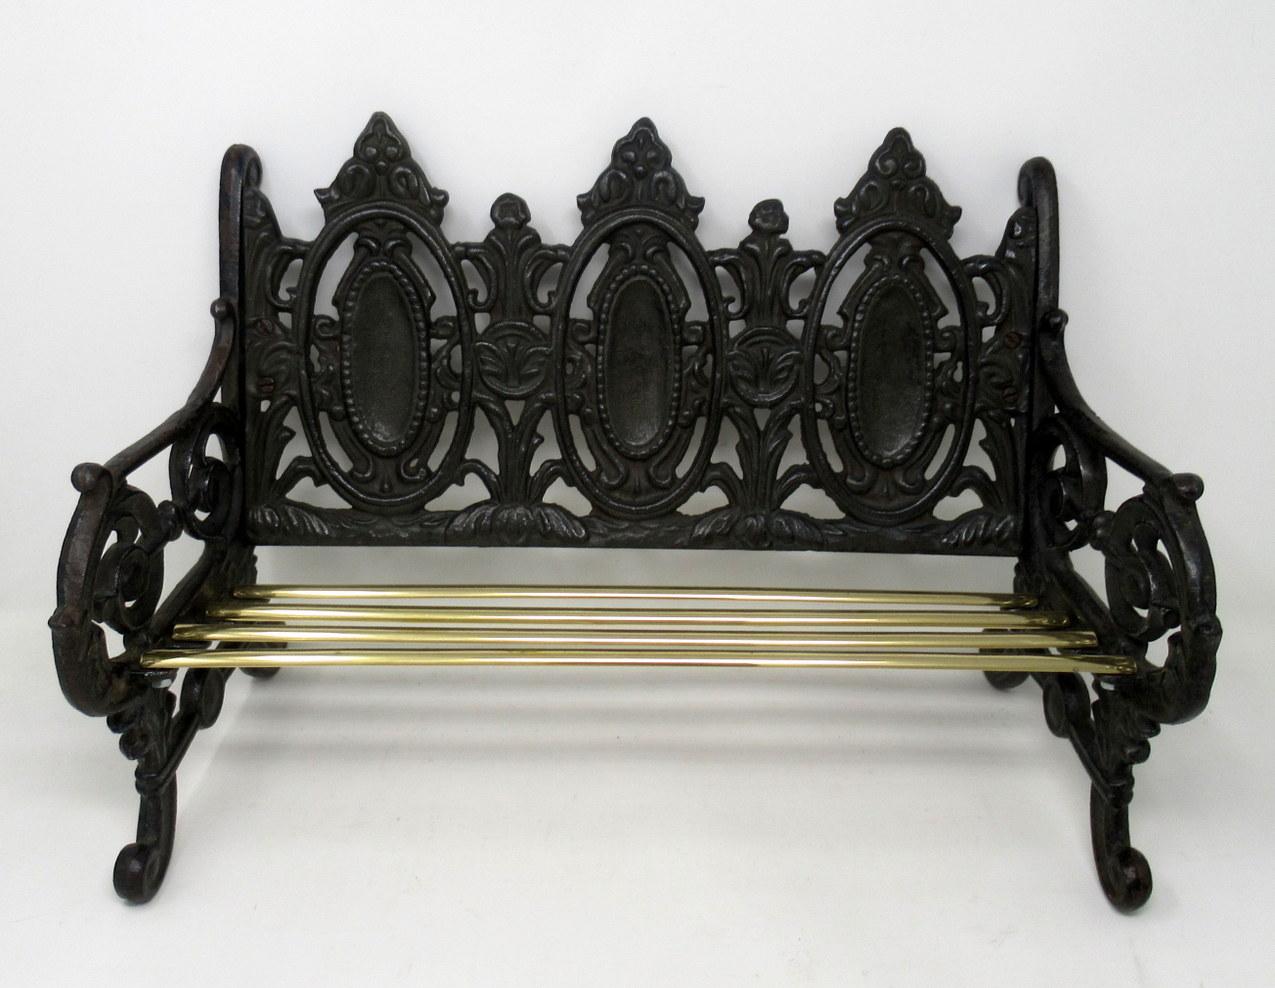 Edwardian Miniature Dolls House Cast Iron and Brass Seat Bench Chair Attrib. Coalbrookdale